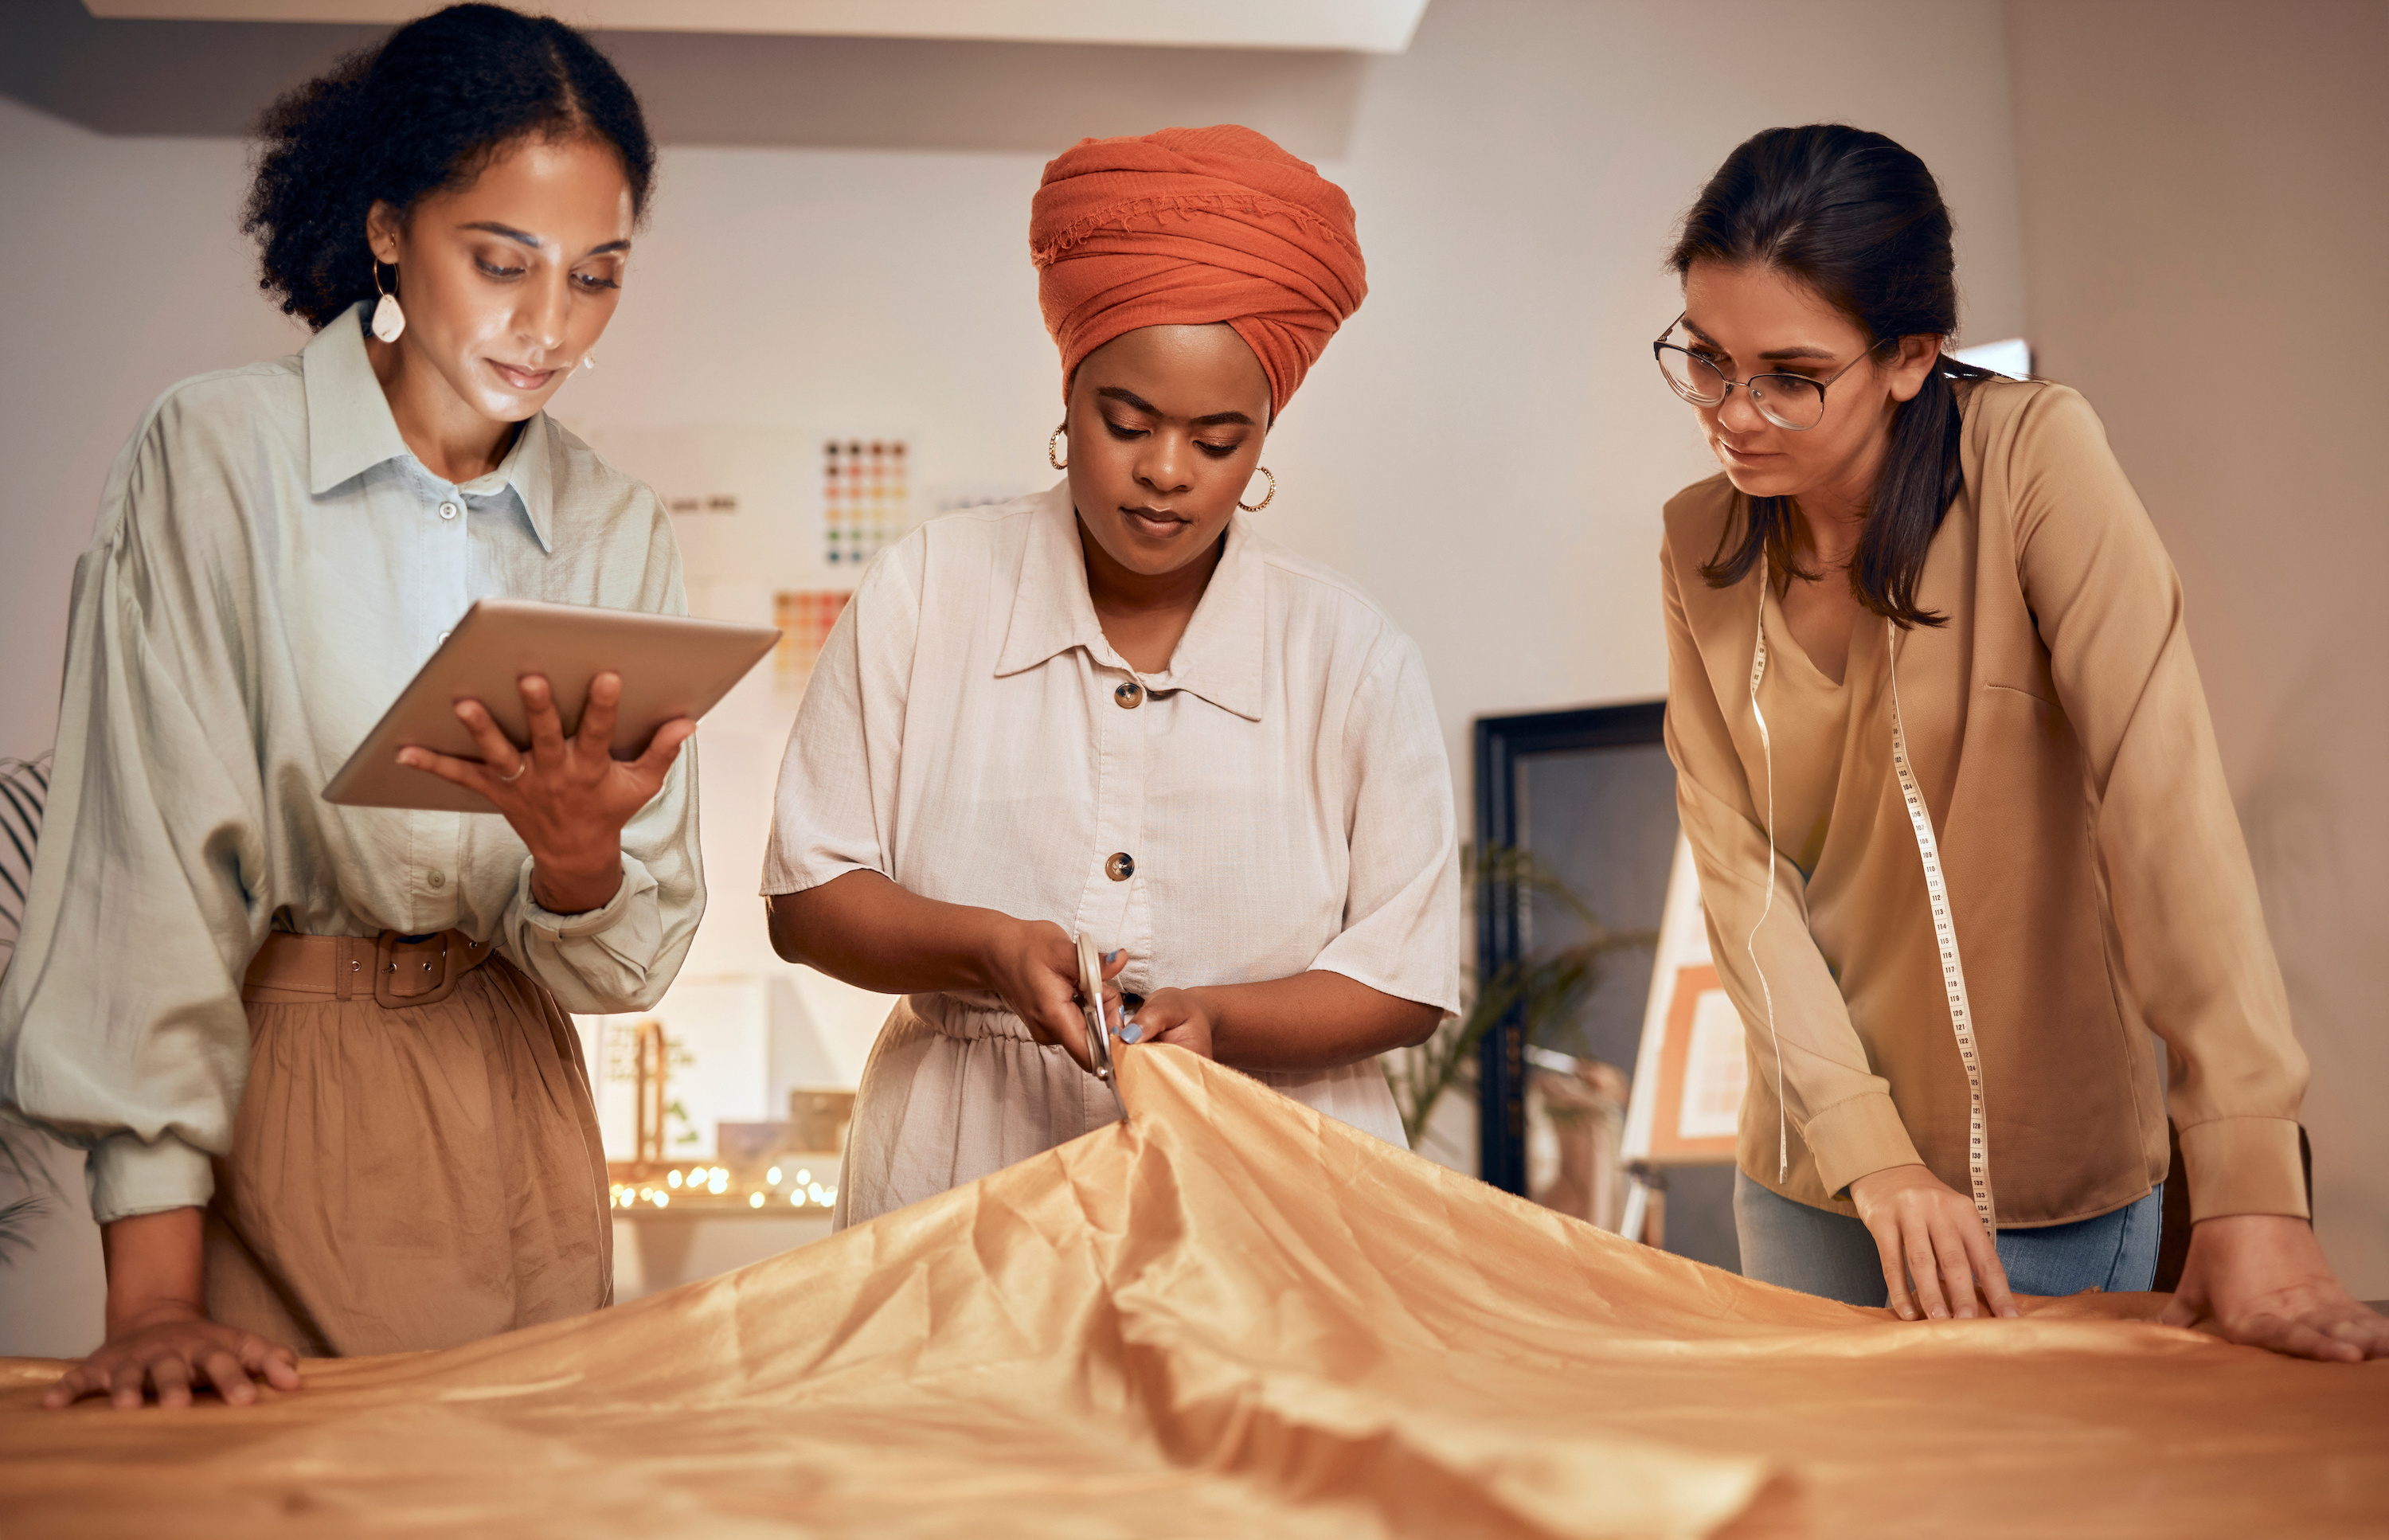 Three women gather around a table where one cuts a sheath of fabric. Learn the seven steps of forming an LLC.